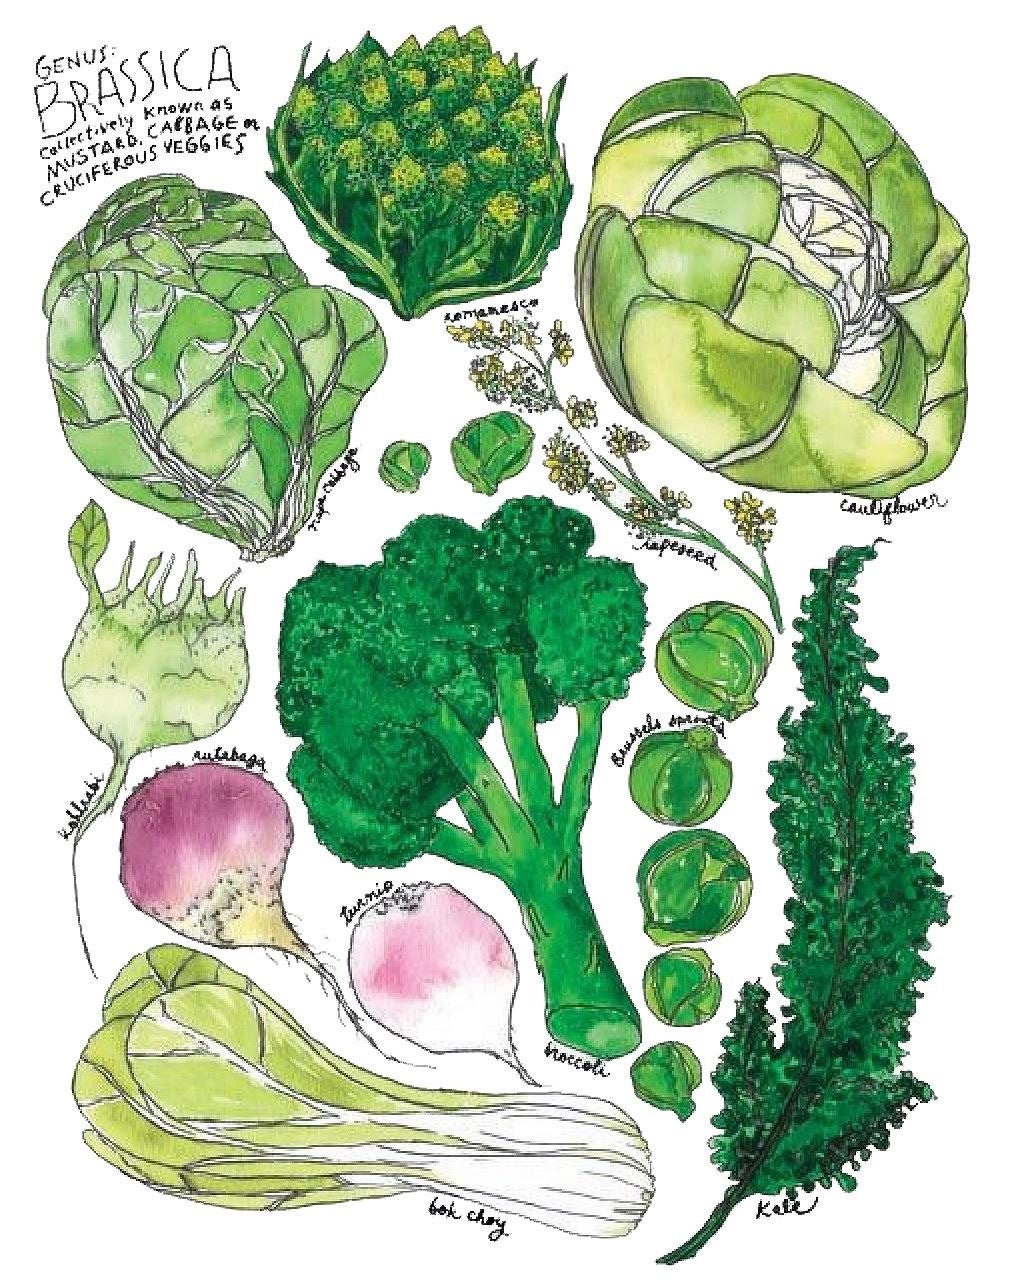 How to Cook Broccoli, Kale, & Other Brassicas So They Actually Taste Good